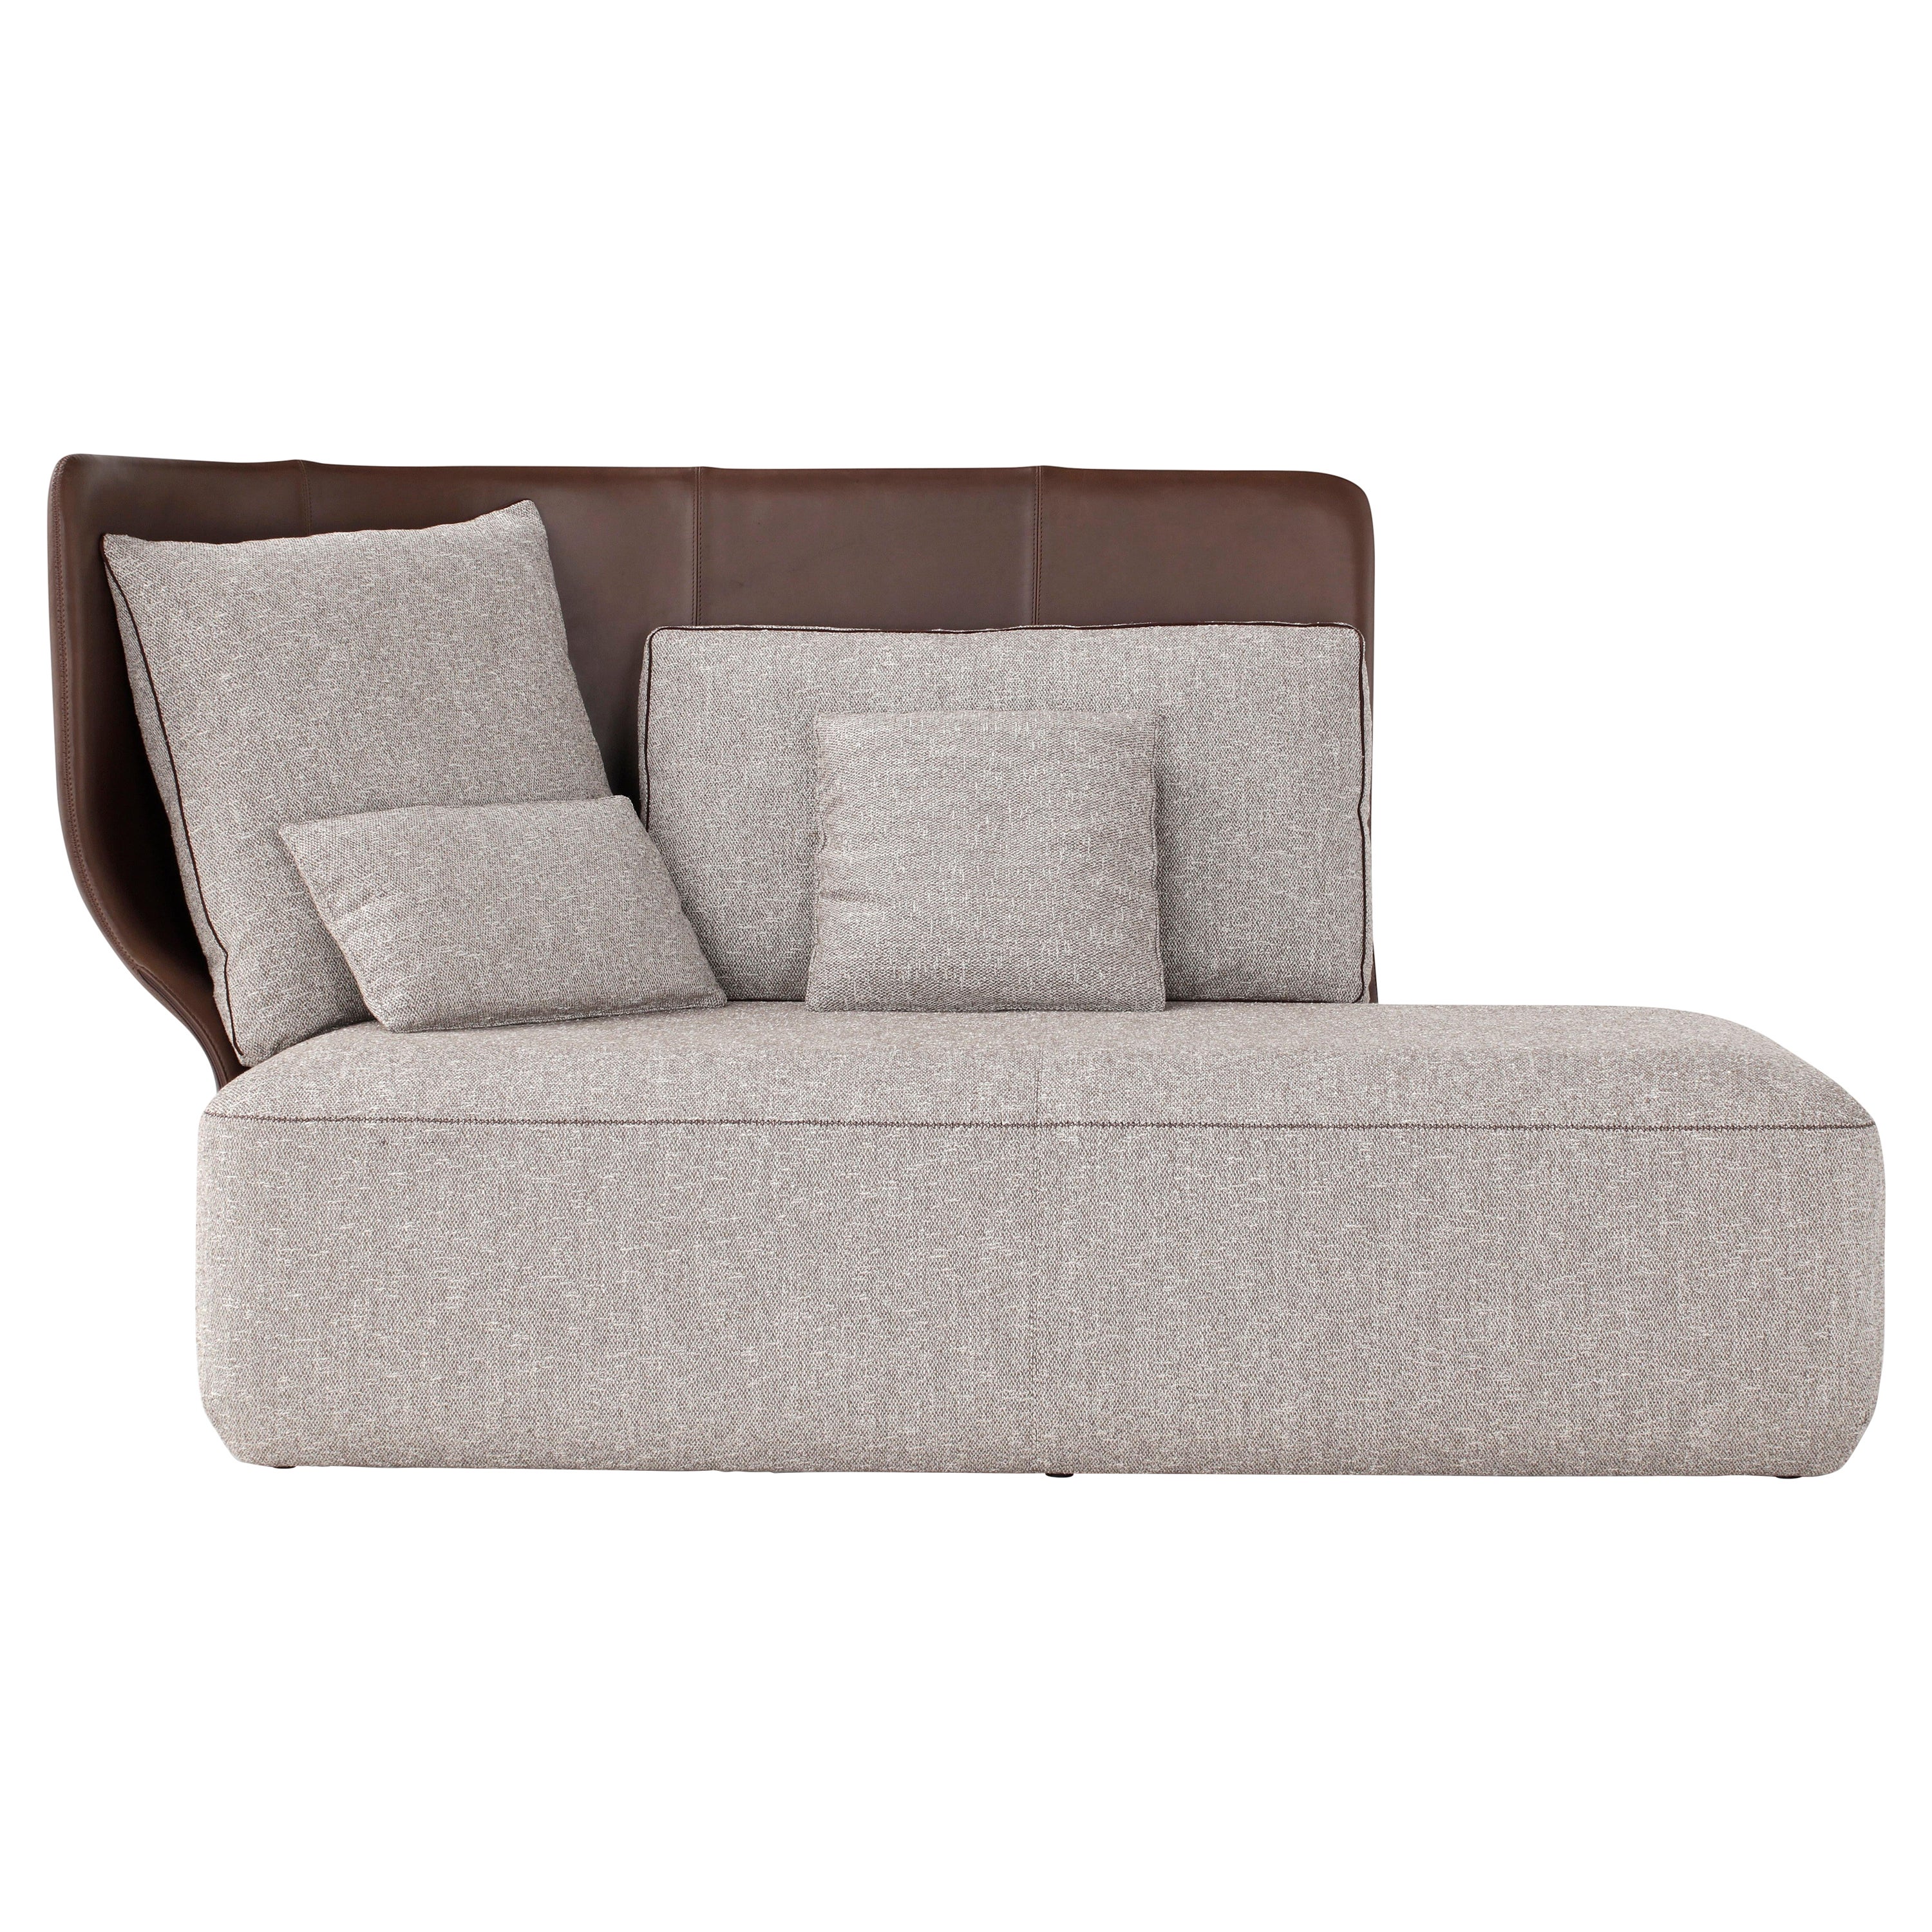 Amura 'Wazaa' Sofa in Brown Leather and Tan Velvet by Stefano Bigi For Sale